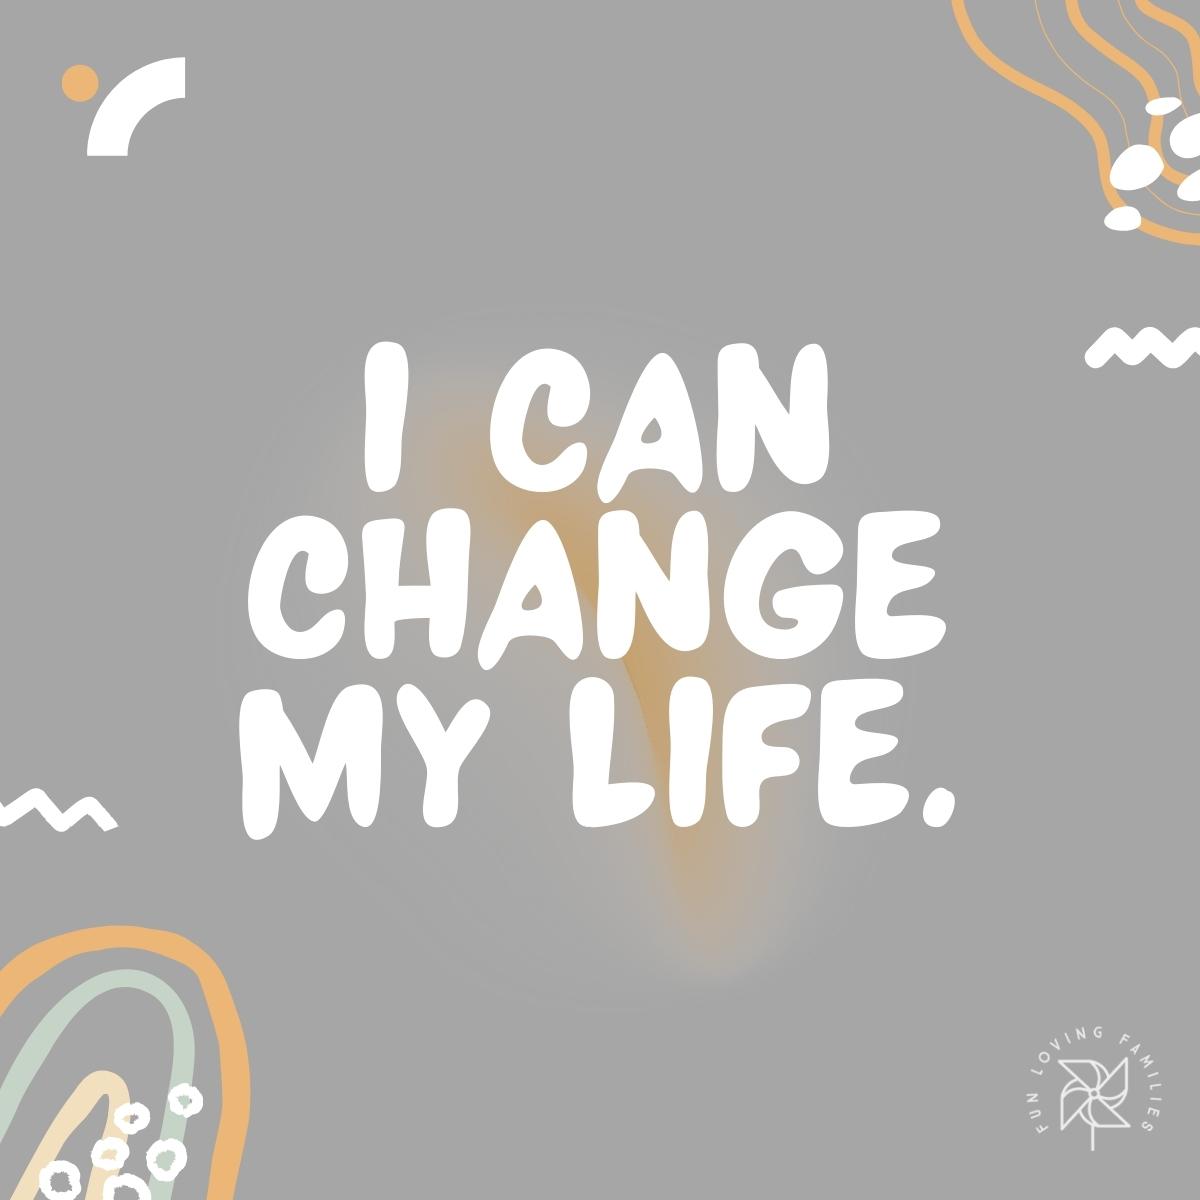 I can change my life affirmation